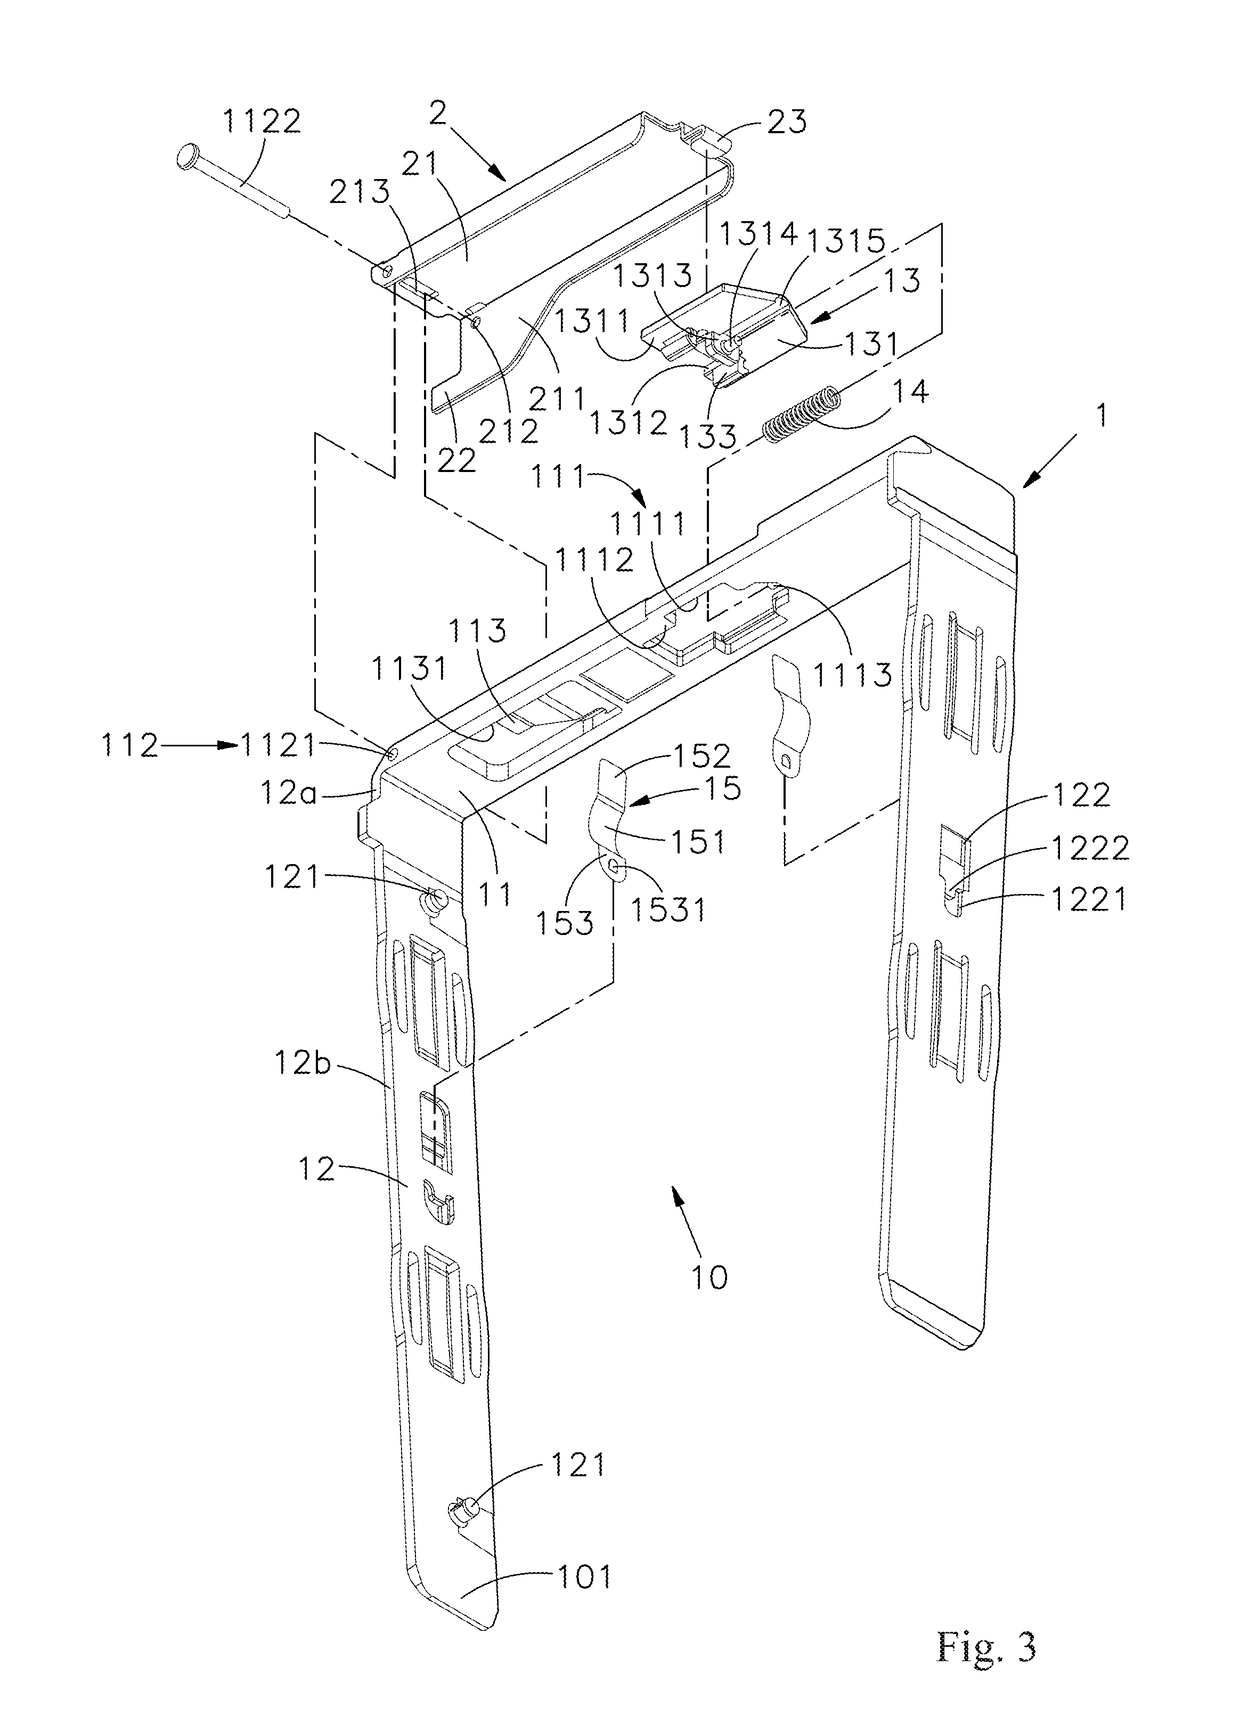 Open-ended screwless positioning module of access apparatus